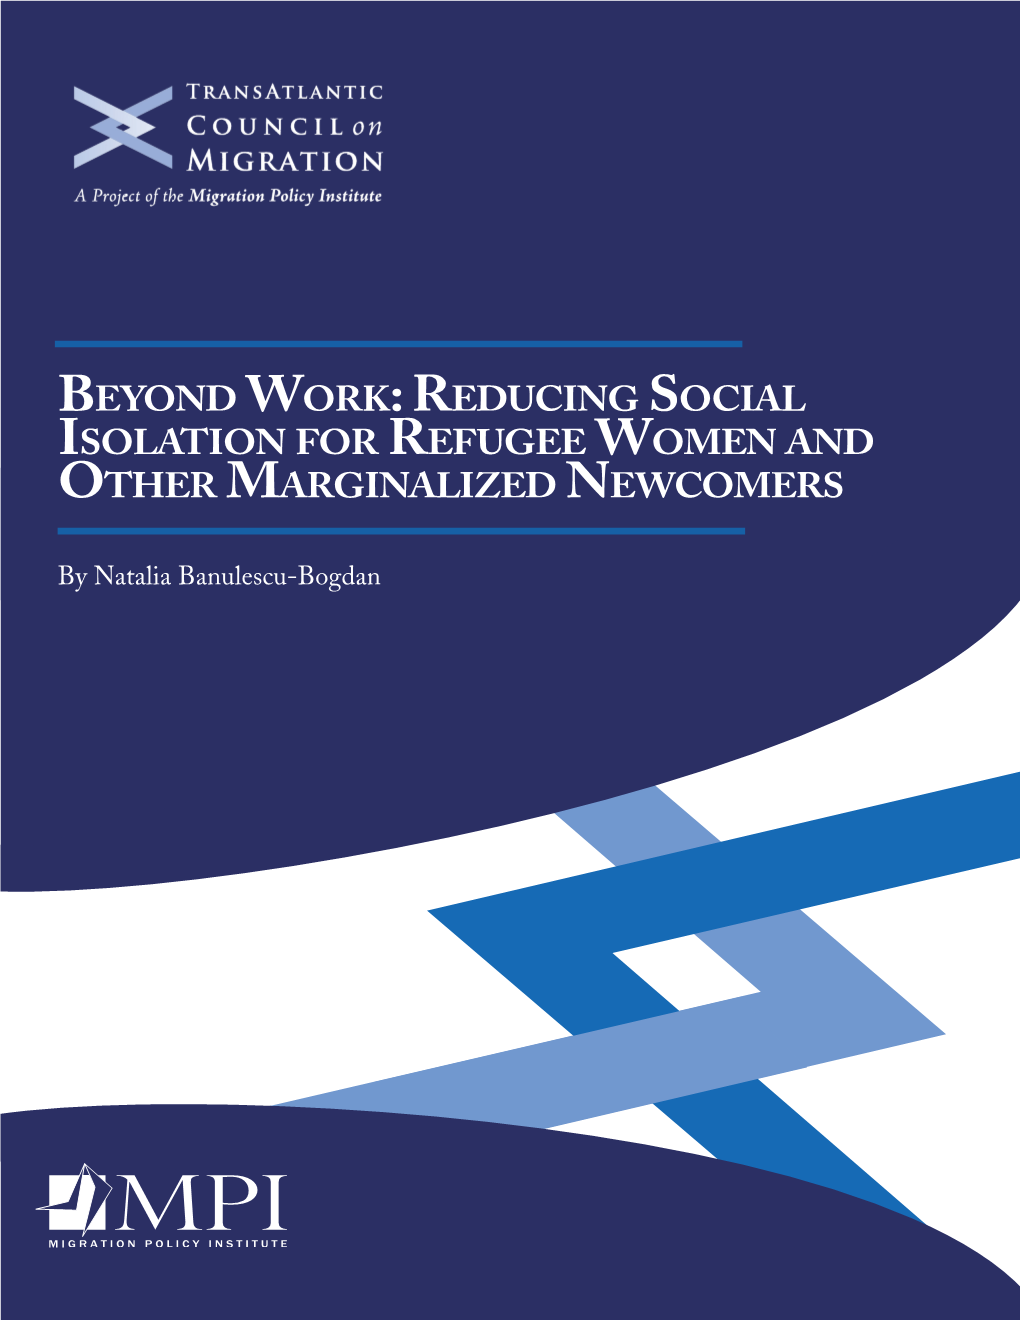 Reducing Social Isolation for Refugee Women and Other Marginalized Newcomers